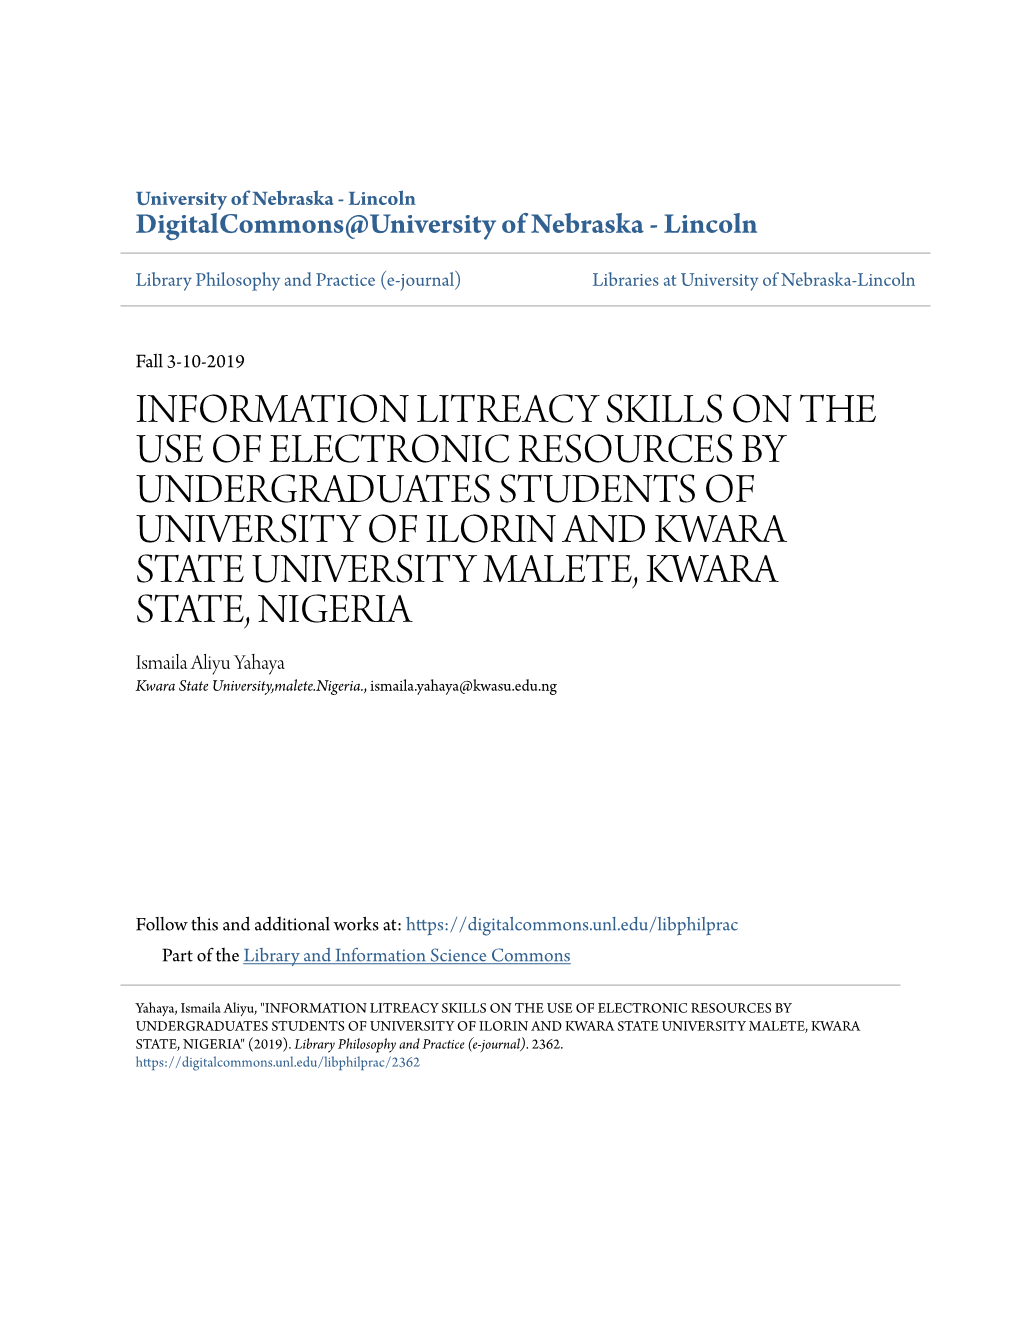 Information Litreacy Skills on the Use of Electronic